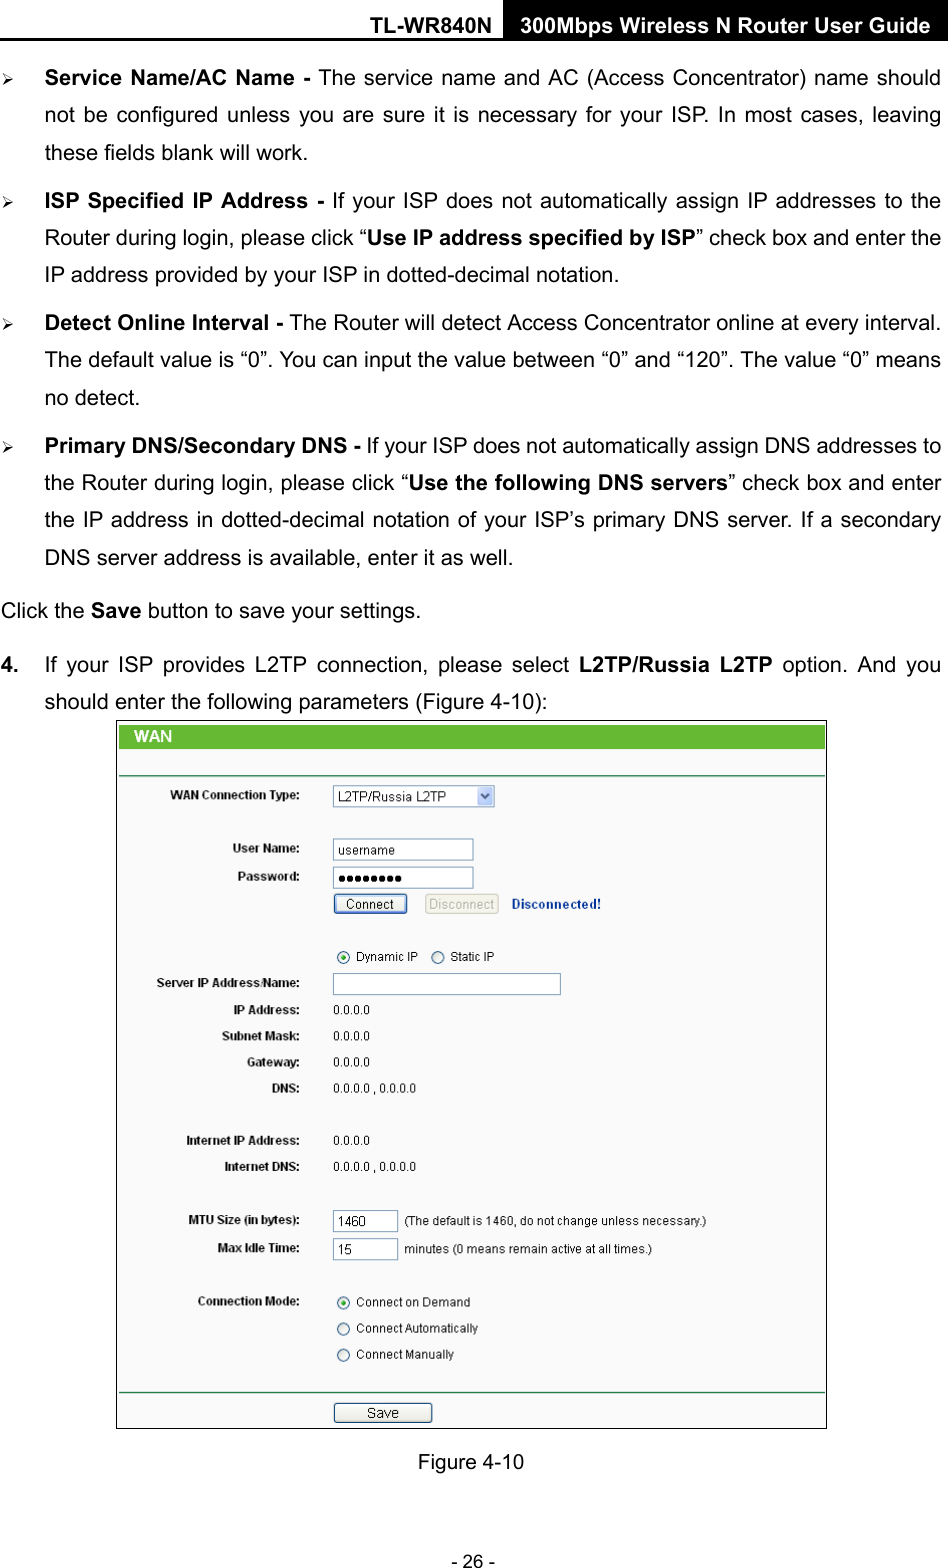 TL-WR840N 300Mbps Wireless N Router User Guide  - 26 -  Service Name/AC Name - The service name and AC (Access Concentrator) name should not be configured unless you are sure it is necessary for your ISP. In most cases, leaving these fields blank will work.  ISP Specified IP Address - If your ISP does not automatically assign IP addresses to the Router during login, please click “Use IP address specified by ISP” check box and enter the IP address provided by your ISP in dotted-decimal notation.  Detect Online Interval - The Router will detect Access Concentrator online at every interval. The default value is “0”. You can input the value between “0” and “120”. The value “0” means no detect.  Primary DNS/Secondary DNS - If your ISP does not automatically assign DNS addresses to the Router during login, please click “Use the following DNS servers” check box and enter the IP address in dotted-decimal notation of your ISP’s primary DNS server. If a secondary DNS server address is available, enter it as well. Click the Save button to save your settings. 4. If your ISP provides L2TP connection, please select L2TP/Russia L2TP option.  And  you should enter the following parameters (Figure 4-10):  Figure 4-10 